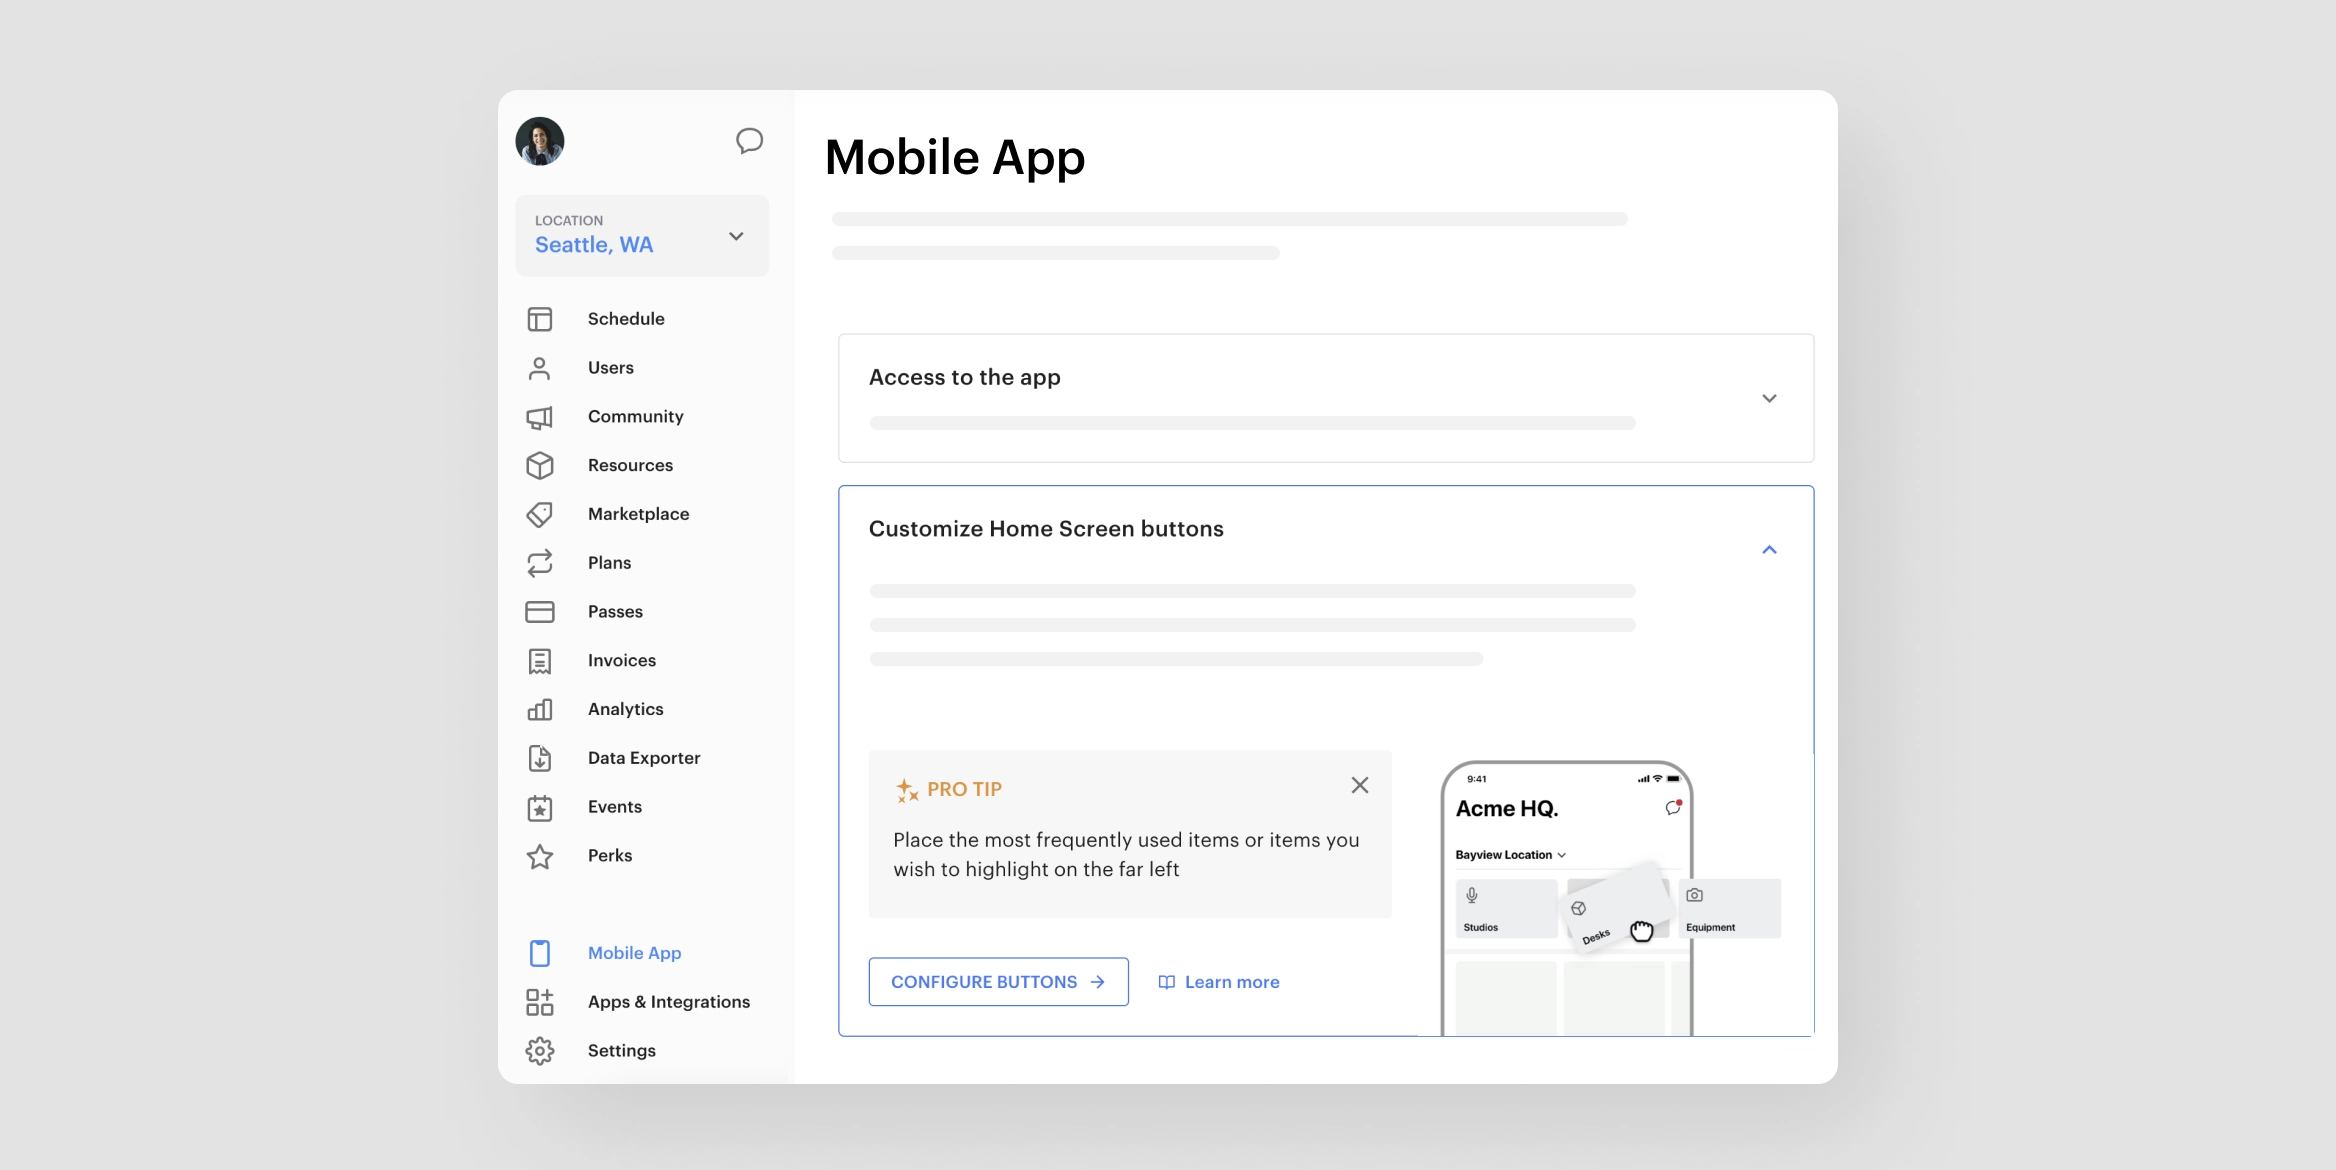 For admins: Customize your mobile app settings